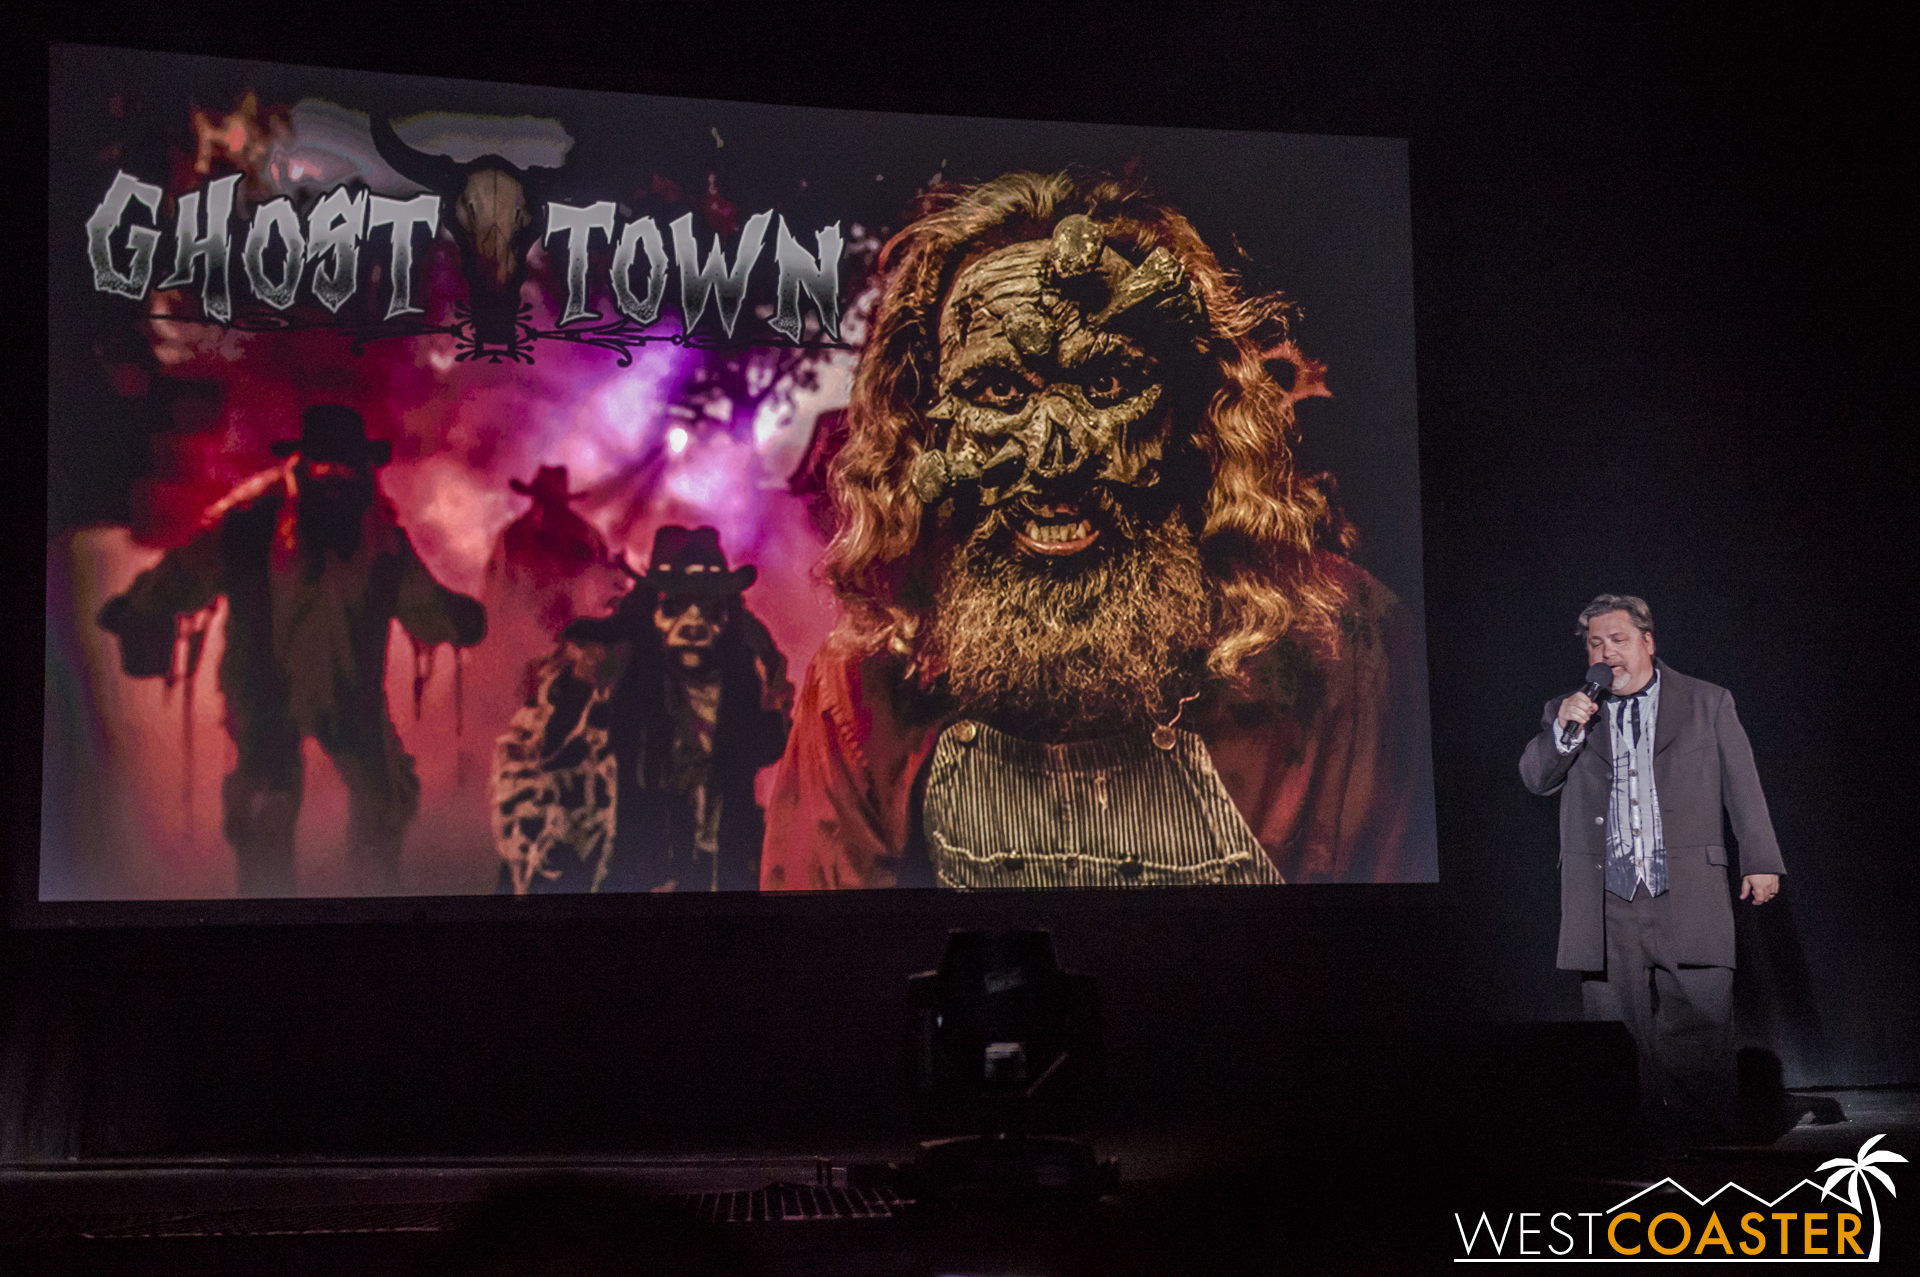  Ghost Town is Ghost Town... it's where Knott's Scary Farm Started, and it's still top billing when it comes to scare zones.&nbsp; This year, new characters like an undertaker (perhaps The Undertaker?) will roam the streets, while Sad Eye Joe, famous